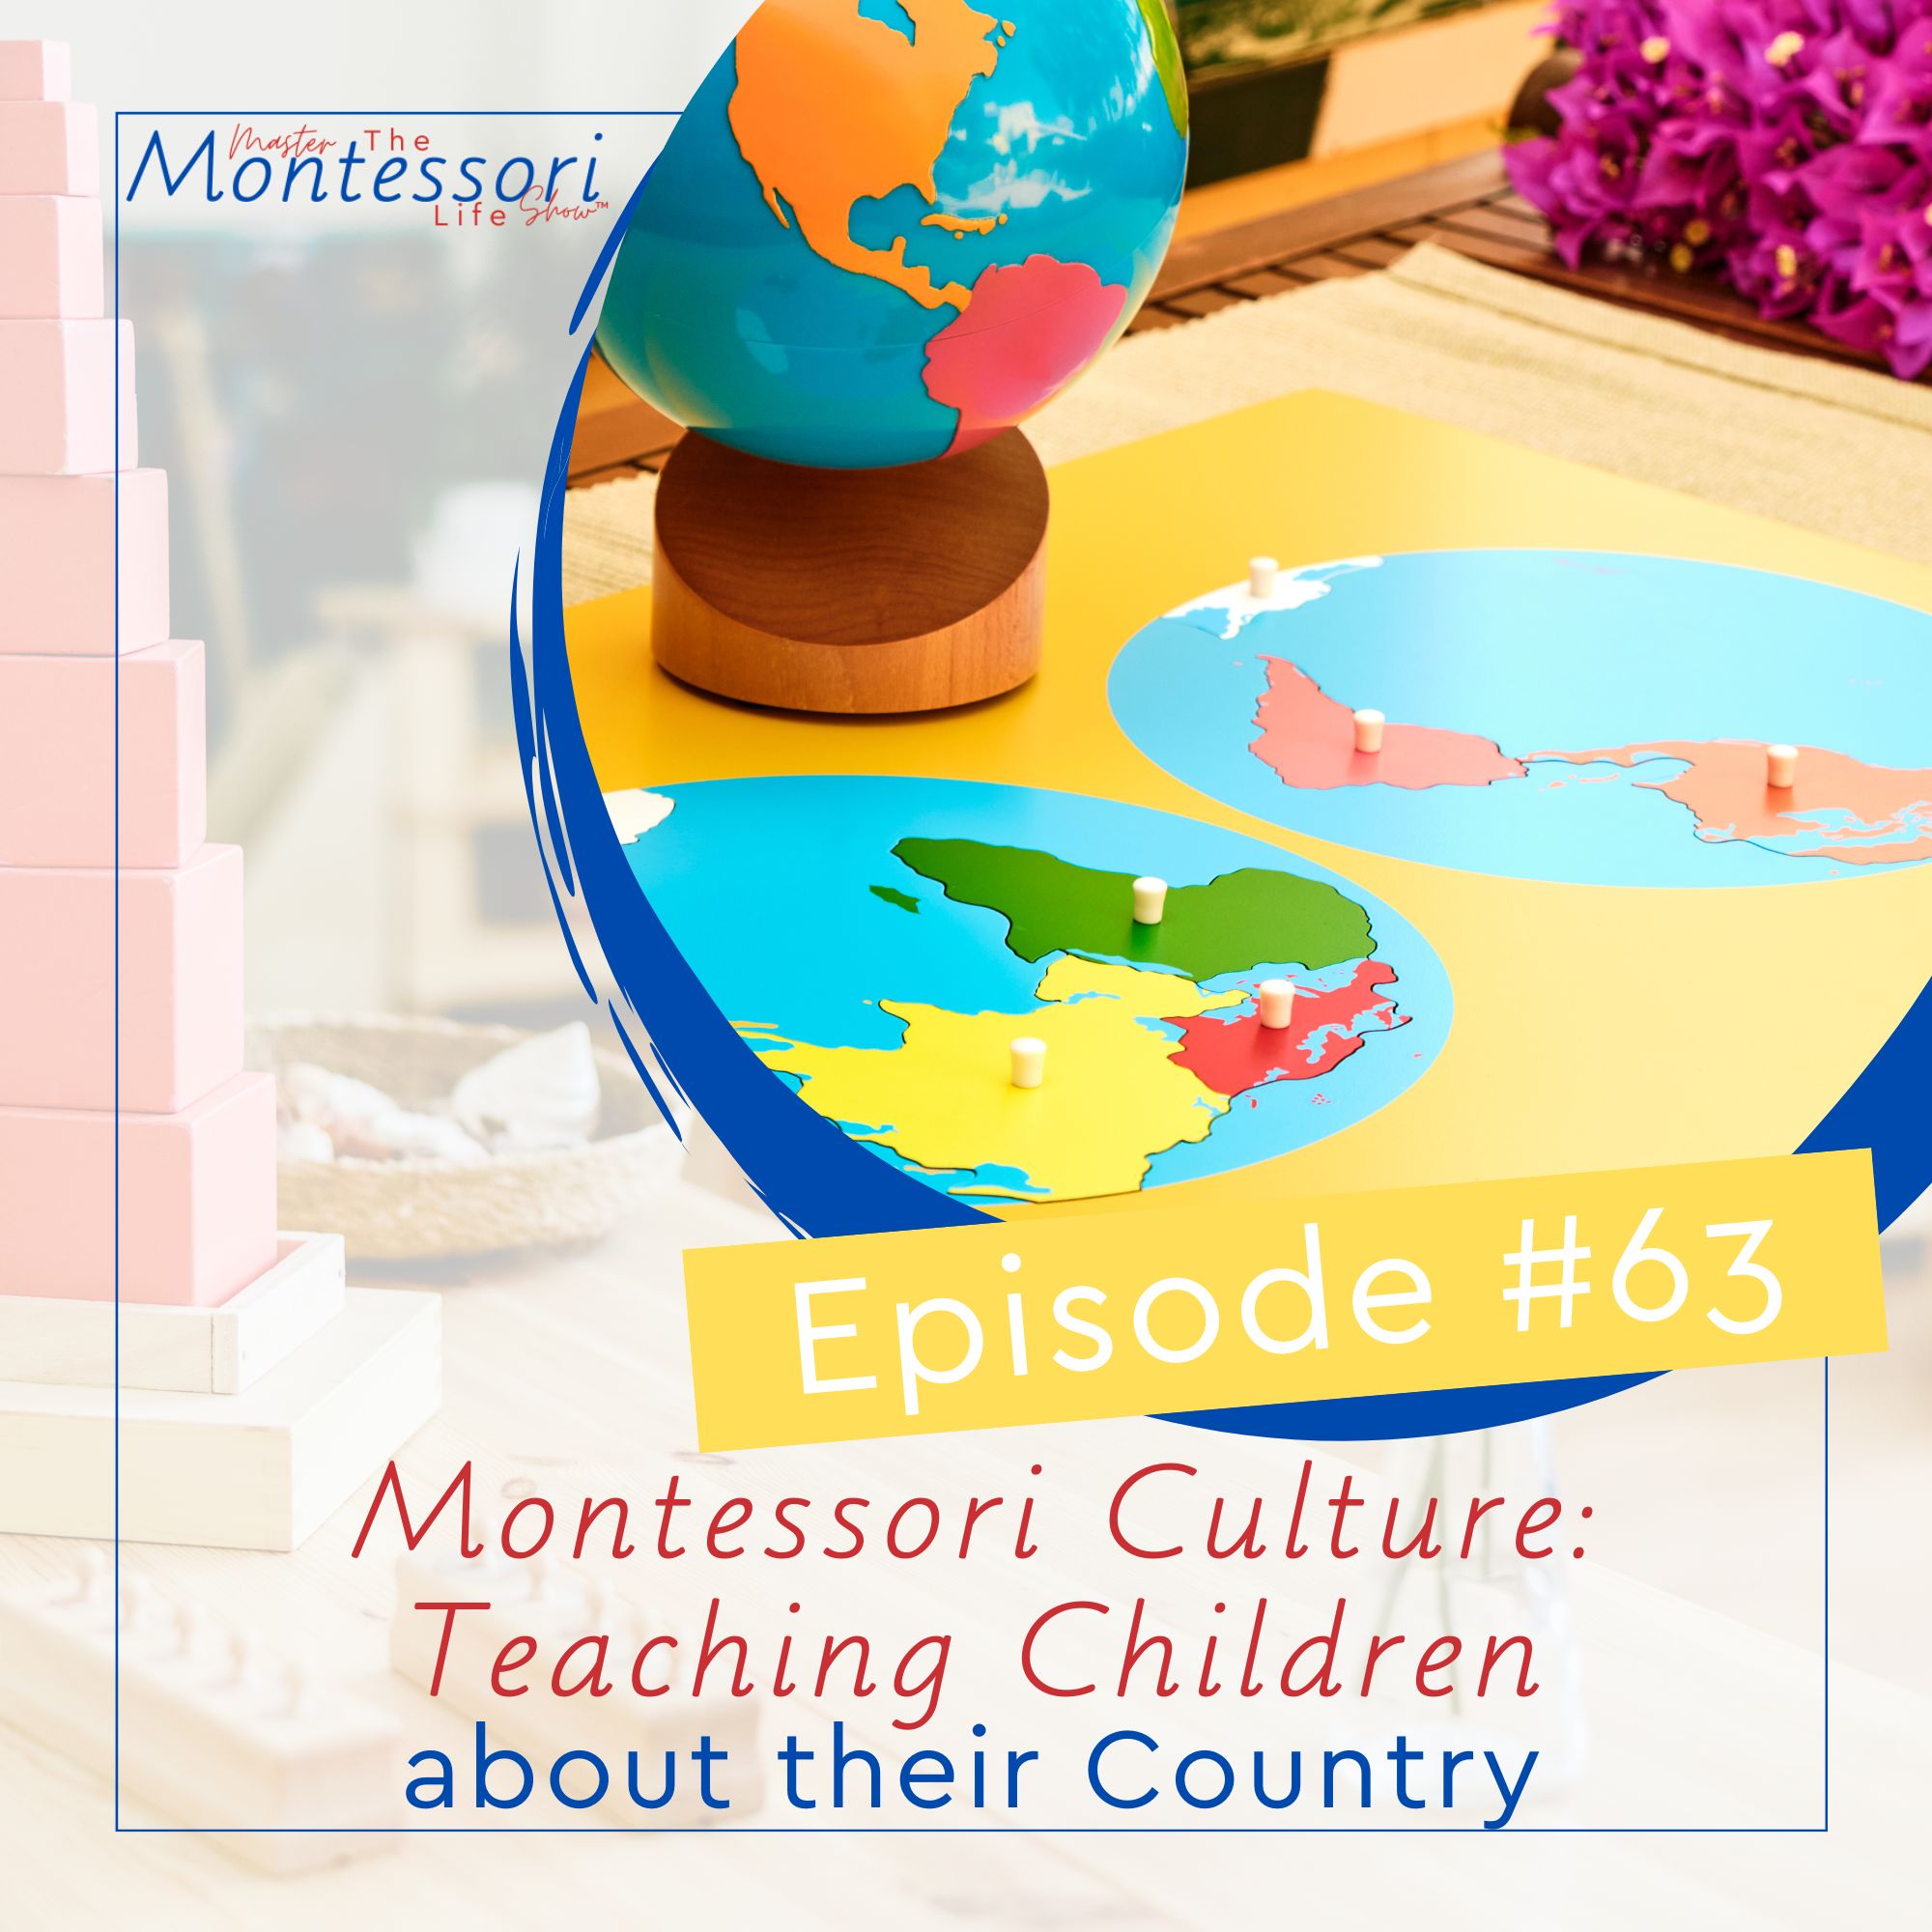 Episode 63: Montessori Culture: Teaching Children about their Country